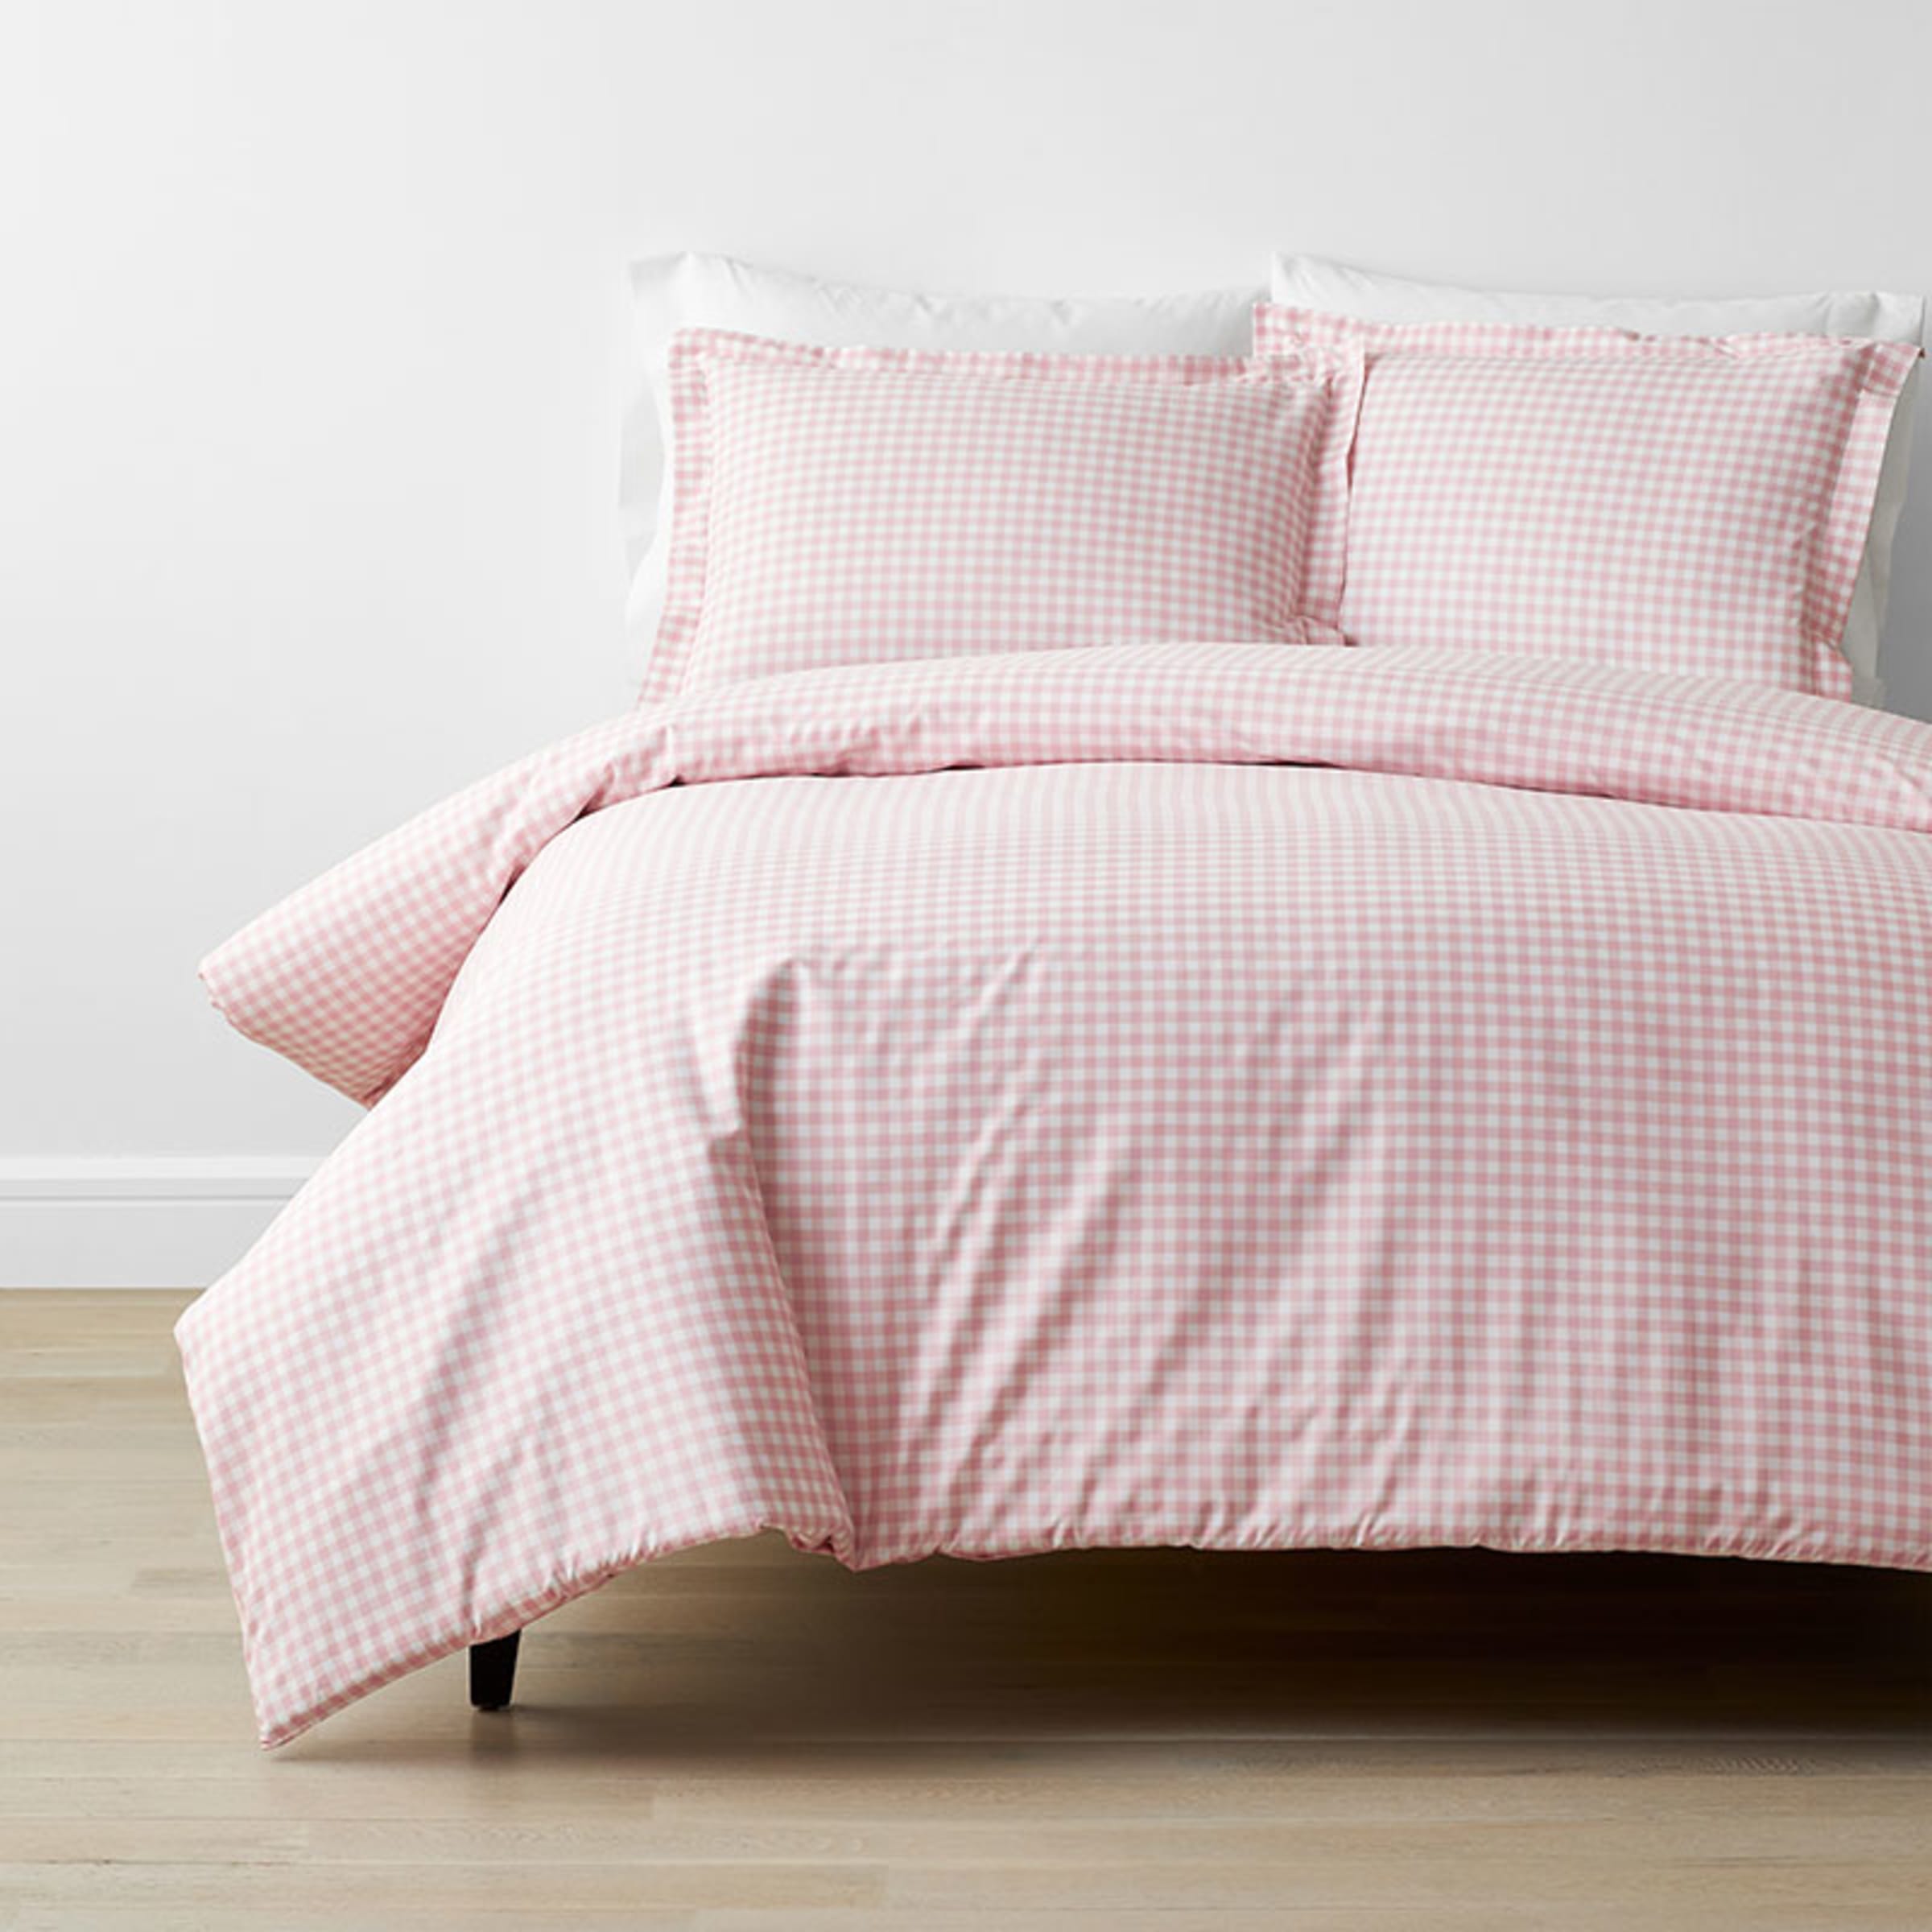 Company Kids™ Gingham Organic Cotton Percale Duvet Cover Set | The Company Store